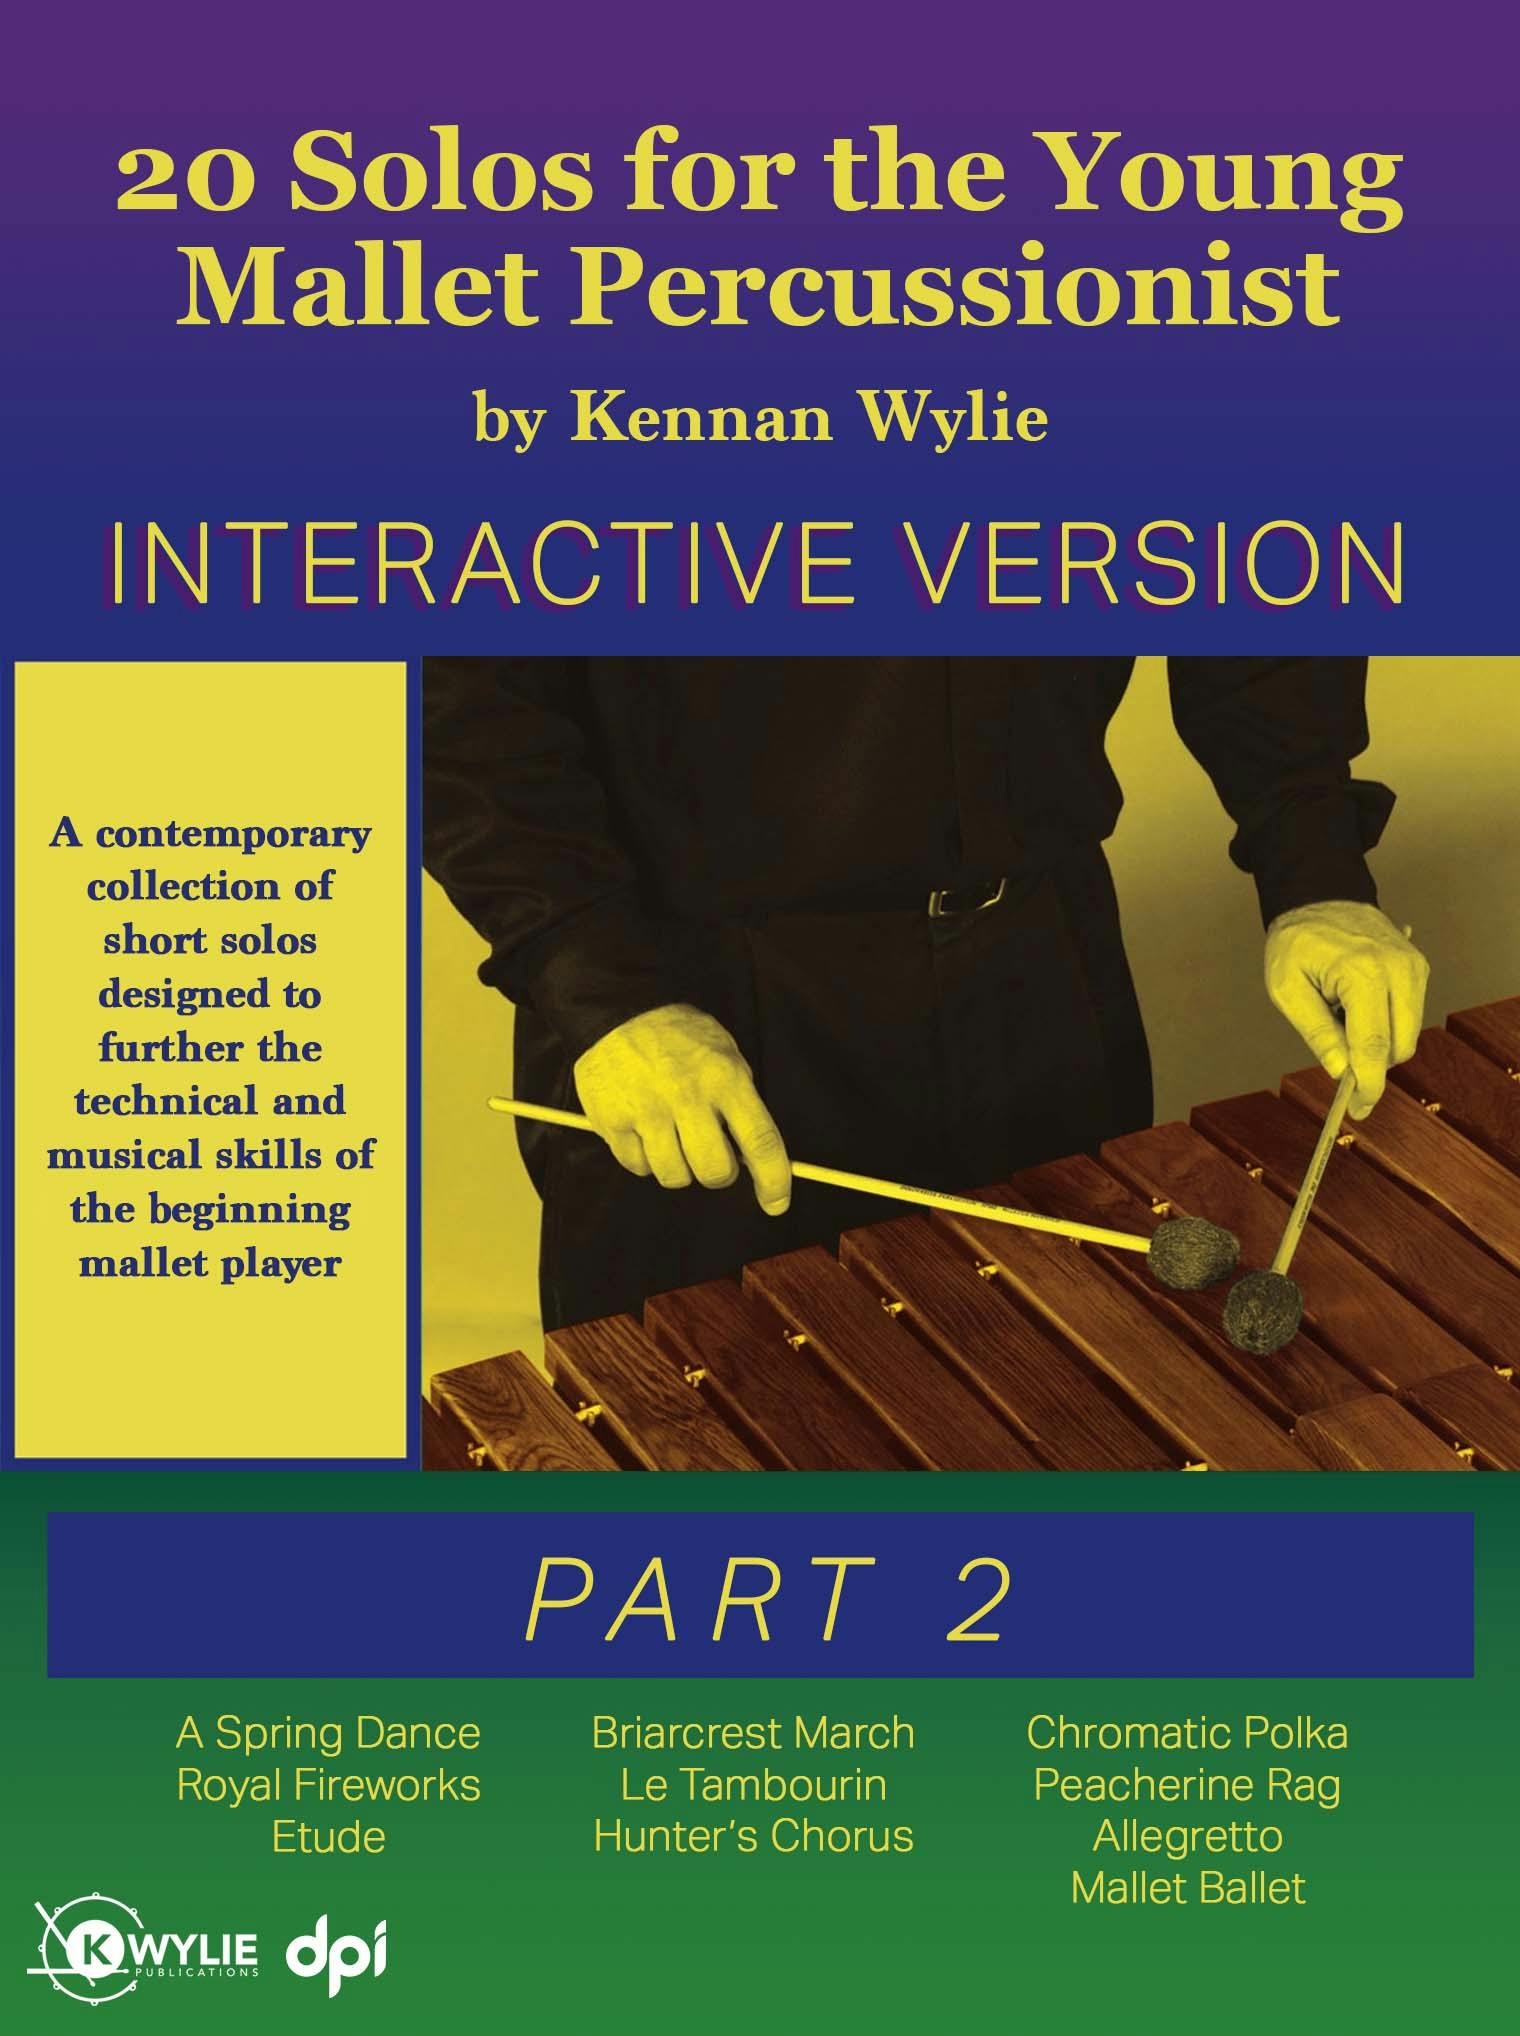 20 Solos for the Young Mallet Percussionist - Part 2 cover